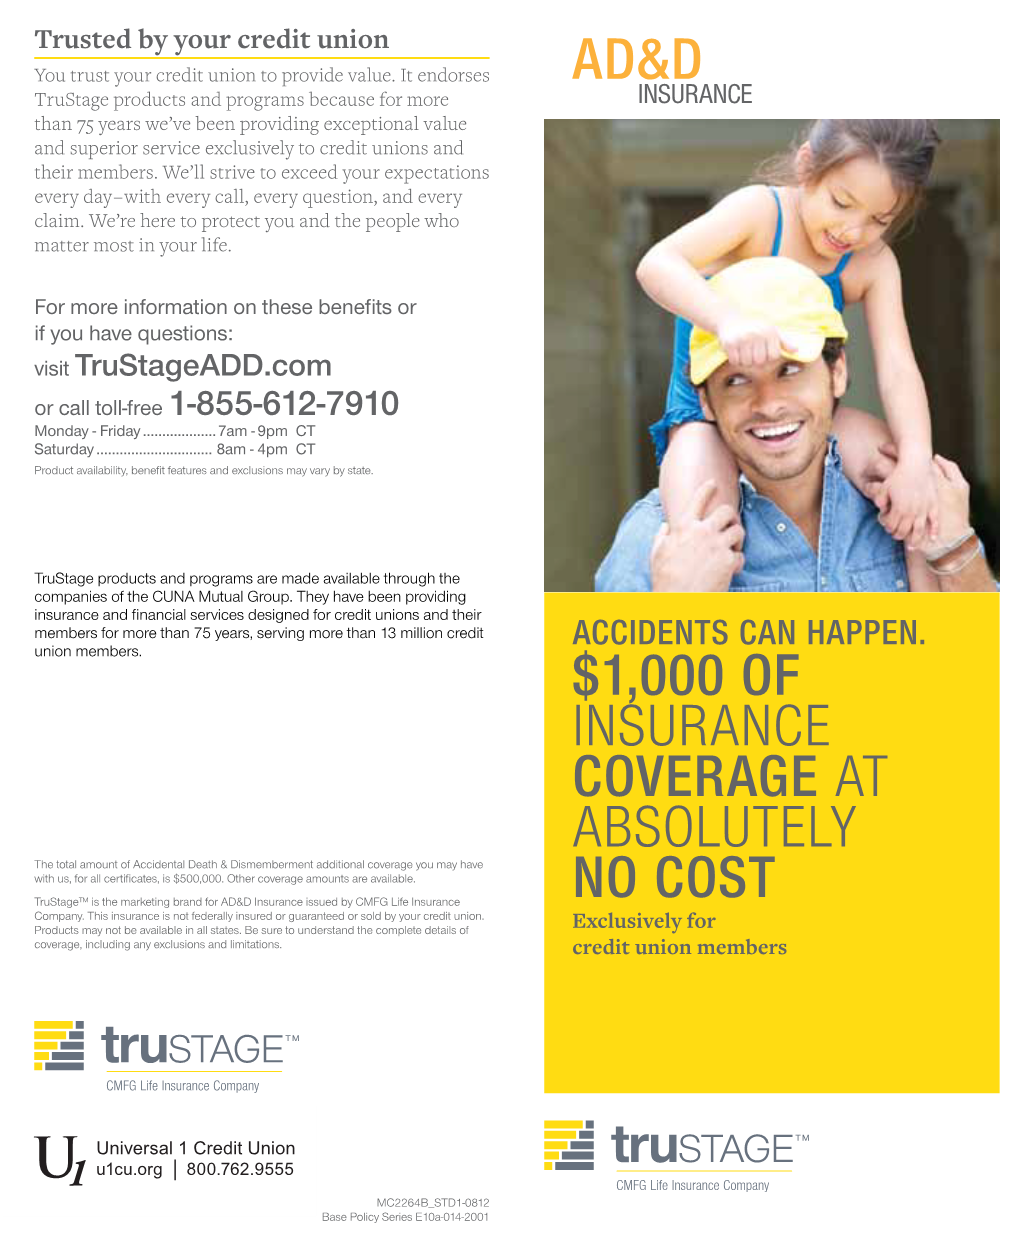 1000 of Insurance Coverage at Absolutely No Cost Ad&D